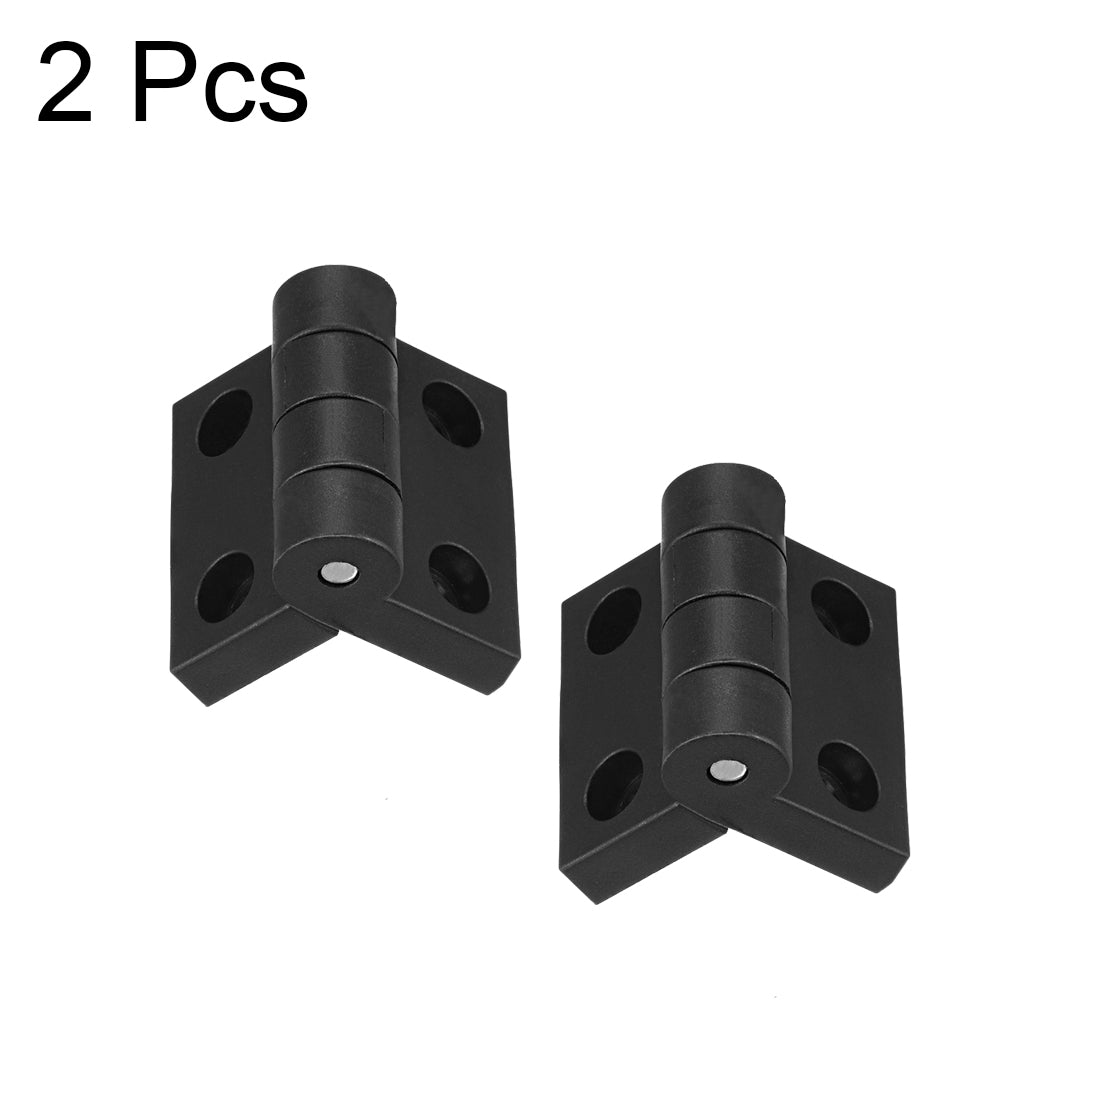 uxcell Uxcell 2pcs Cabinet Gate Closet Door 70mm Length ABS Nylon Hinge